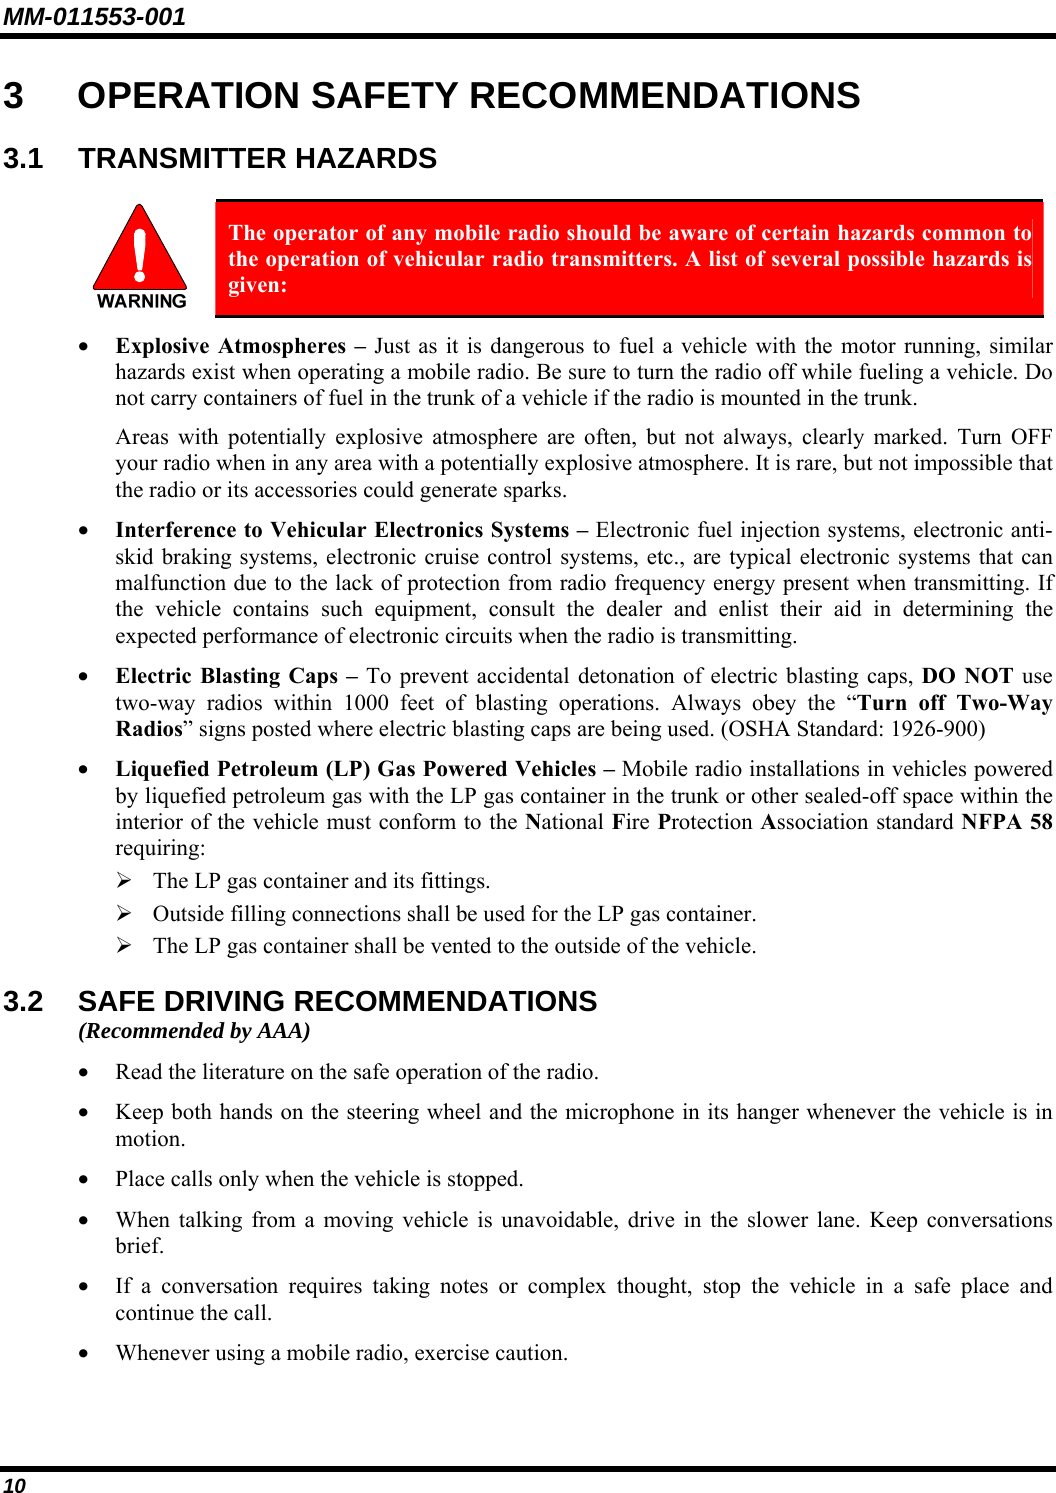 MM-011553-001 3 OPERATION SAFETY RECOMMENDATIONS 3.1 TRANSMITTER HAZARDS   The operator of any mobile radio should be aware of certain hazards common to the operation of vehicular radio transmitters. A list of several possible hazards is given: • Explosive Atmospheres – Just as it is dangerous to fuel a vehicle with the motor running, similar hazards exist when operating a mobile radio. Be sure to turn the radio off while fueling a vehicle. Do not carry containers of fuel in the trunk of a vehicle if the radio is mounted in the trunk. Areas with potentially explosive atmosphere are often, but not always, clearly marked. Turn OFF your radio when in any area with a potentially explosive atmosphere. It is rare, but not impossible that the radio or its accessories could generate sparks. • Interference to Vehicular Electronics Systems – Electronic fuel injection systems, electronic anti-skid braking systems, electronic cruise control systems, etc., are typical electronic systems that can malfunction due to the lack of protection from radio frequency energy present when transmitting. If the vehicle contains such equipment, consult the dealer and enlist their aid in determining the expected performance of electronic circuits when the radio is transmitting. • Electric Blasting Caps – To prevent accidental detonation of electric blasting caps, DO NOT use two-way radios within 1000 feet of blasting operations. Always obey the “Turn off Two-Way Radios” signs posted where electric blasting caps are being used. (OSHA Standard: 1926-900) • Liquefied Petroleum (LP) Gas Powered Vehicles – Mobile radio installations in vehicles powered by liquefied petroleum gas with the LP gas container in the trunk or other sealed-off space within the interior of the vehicle must conform to the National Fire Protection Association standard NFPA 58 requiring: ¾ The LP gas container and its fittings. ¾ Outside filling connections shall be used for the LP gas container. ¾ The LP gas container shall be vented to the outside of the vehicle. 3.2  SAFE DRIVING RECOMMENDATIONS (Recommended by AAA) • Read the literature on the safe operation of the radio. • Keep both hands on the steering wheel and the microphone in its hanger whenever the vehicle is in motion. • Place calls only when the vehicle is stopped. • When talking from a moving vehicle is unavoidable, drive in the slower lane. Keep conversations brief. • If a conversation requires taking notes or complex thought, stop the vehicle in a safe place and continue the call. • Whenever using a mobile radio, exercise caution. 10 